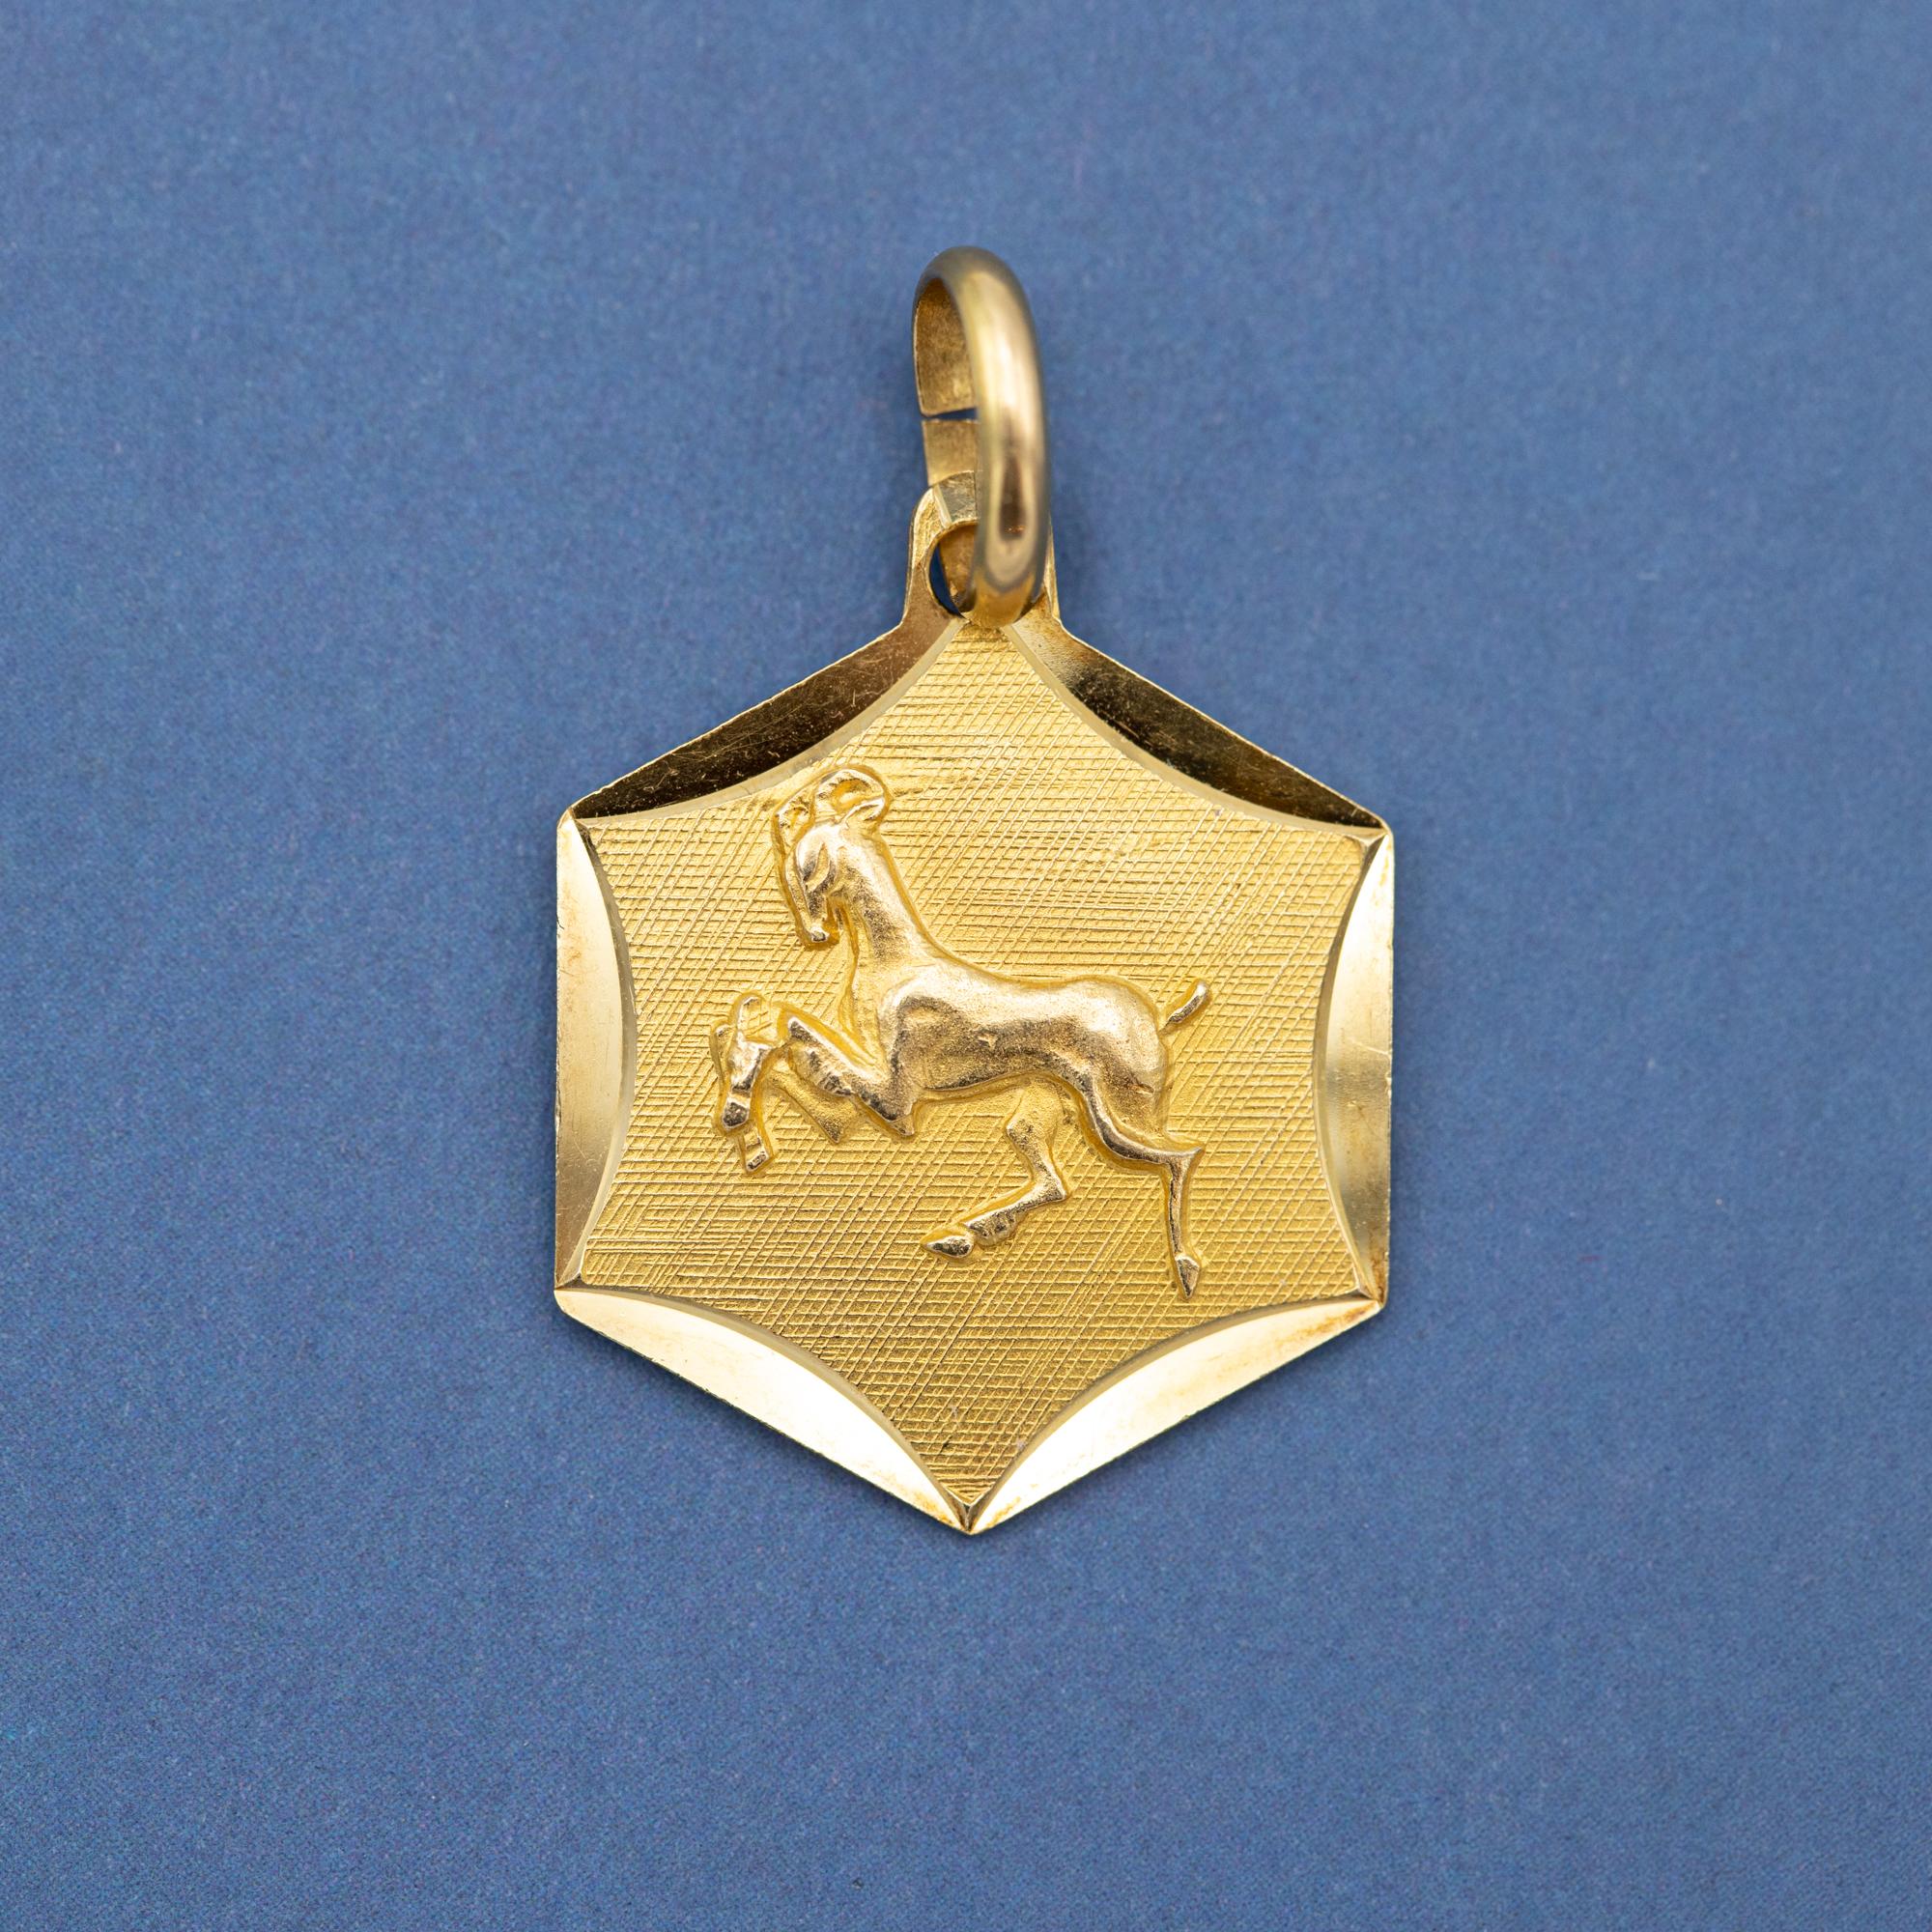 Vintage 18 k Italian zodiac charm pendant - Aries charm - solid yellow gold For Sale 2